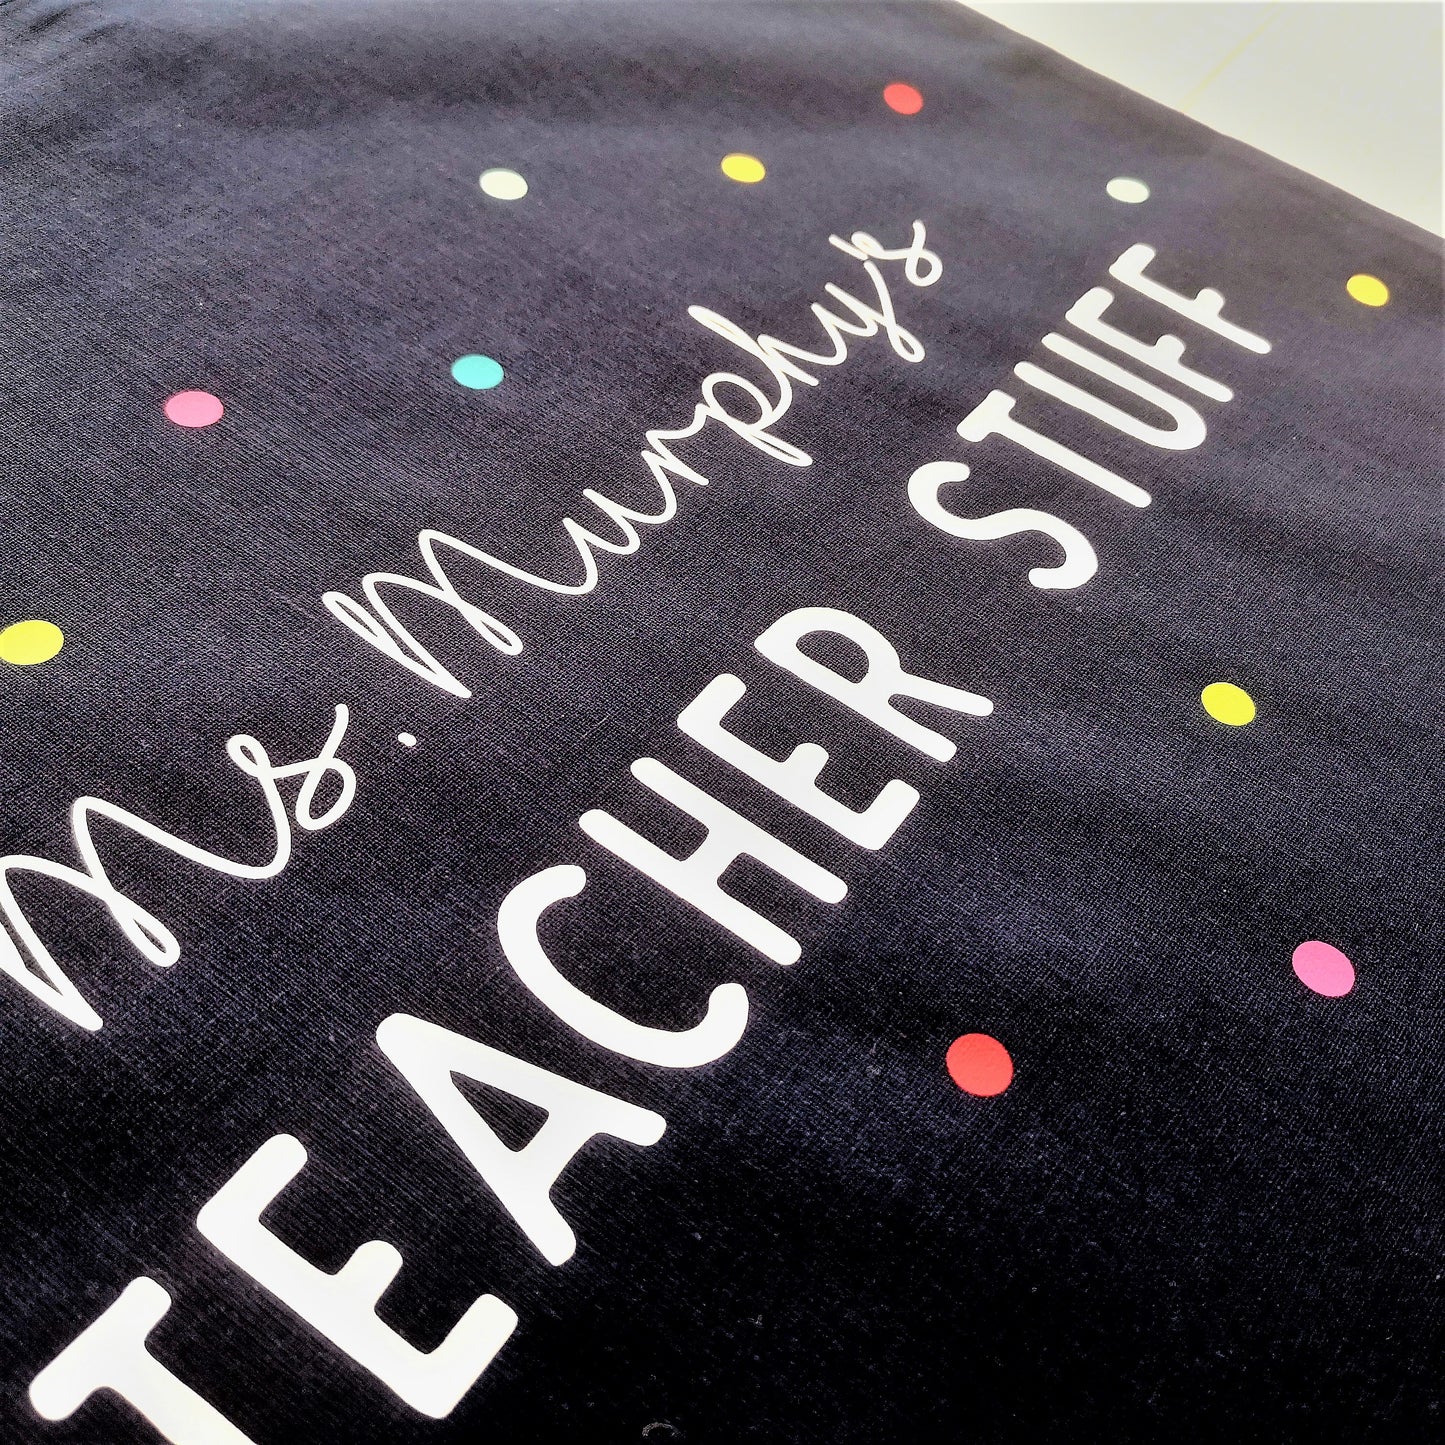 A close up photo of a personalised lightweight black cotton tote with <Name>'s TEACHER STUFF on it. The text is surrounded with multicoloured polkadots